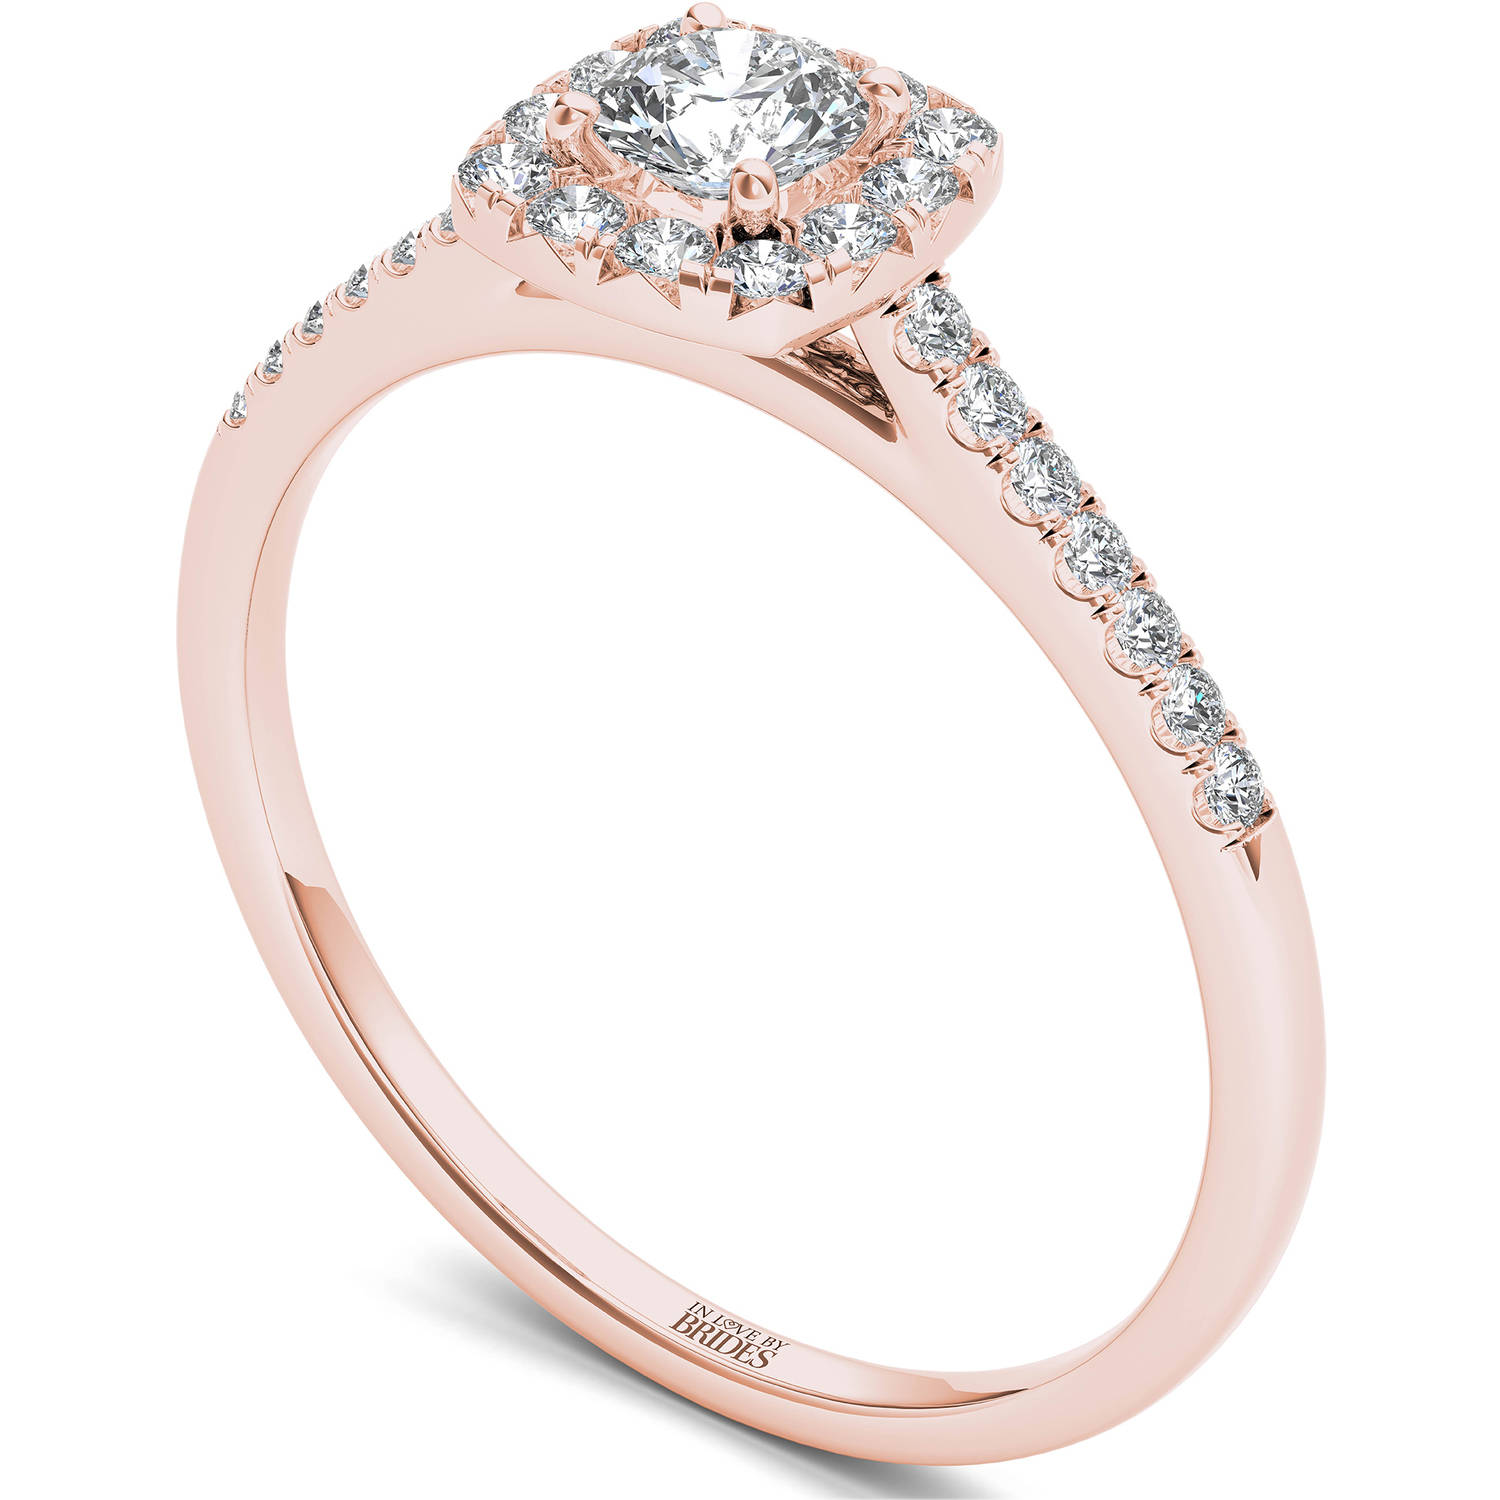 In Love By Brides 3/8ct Tw Diamond Cushi - image 2 of 7